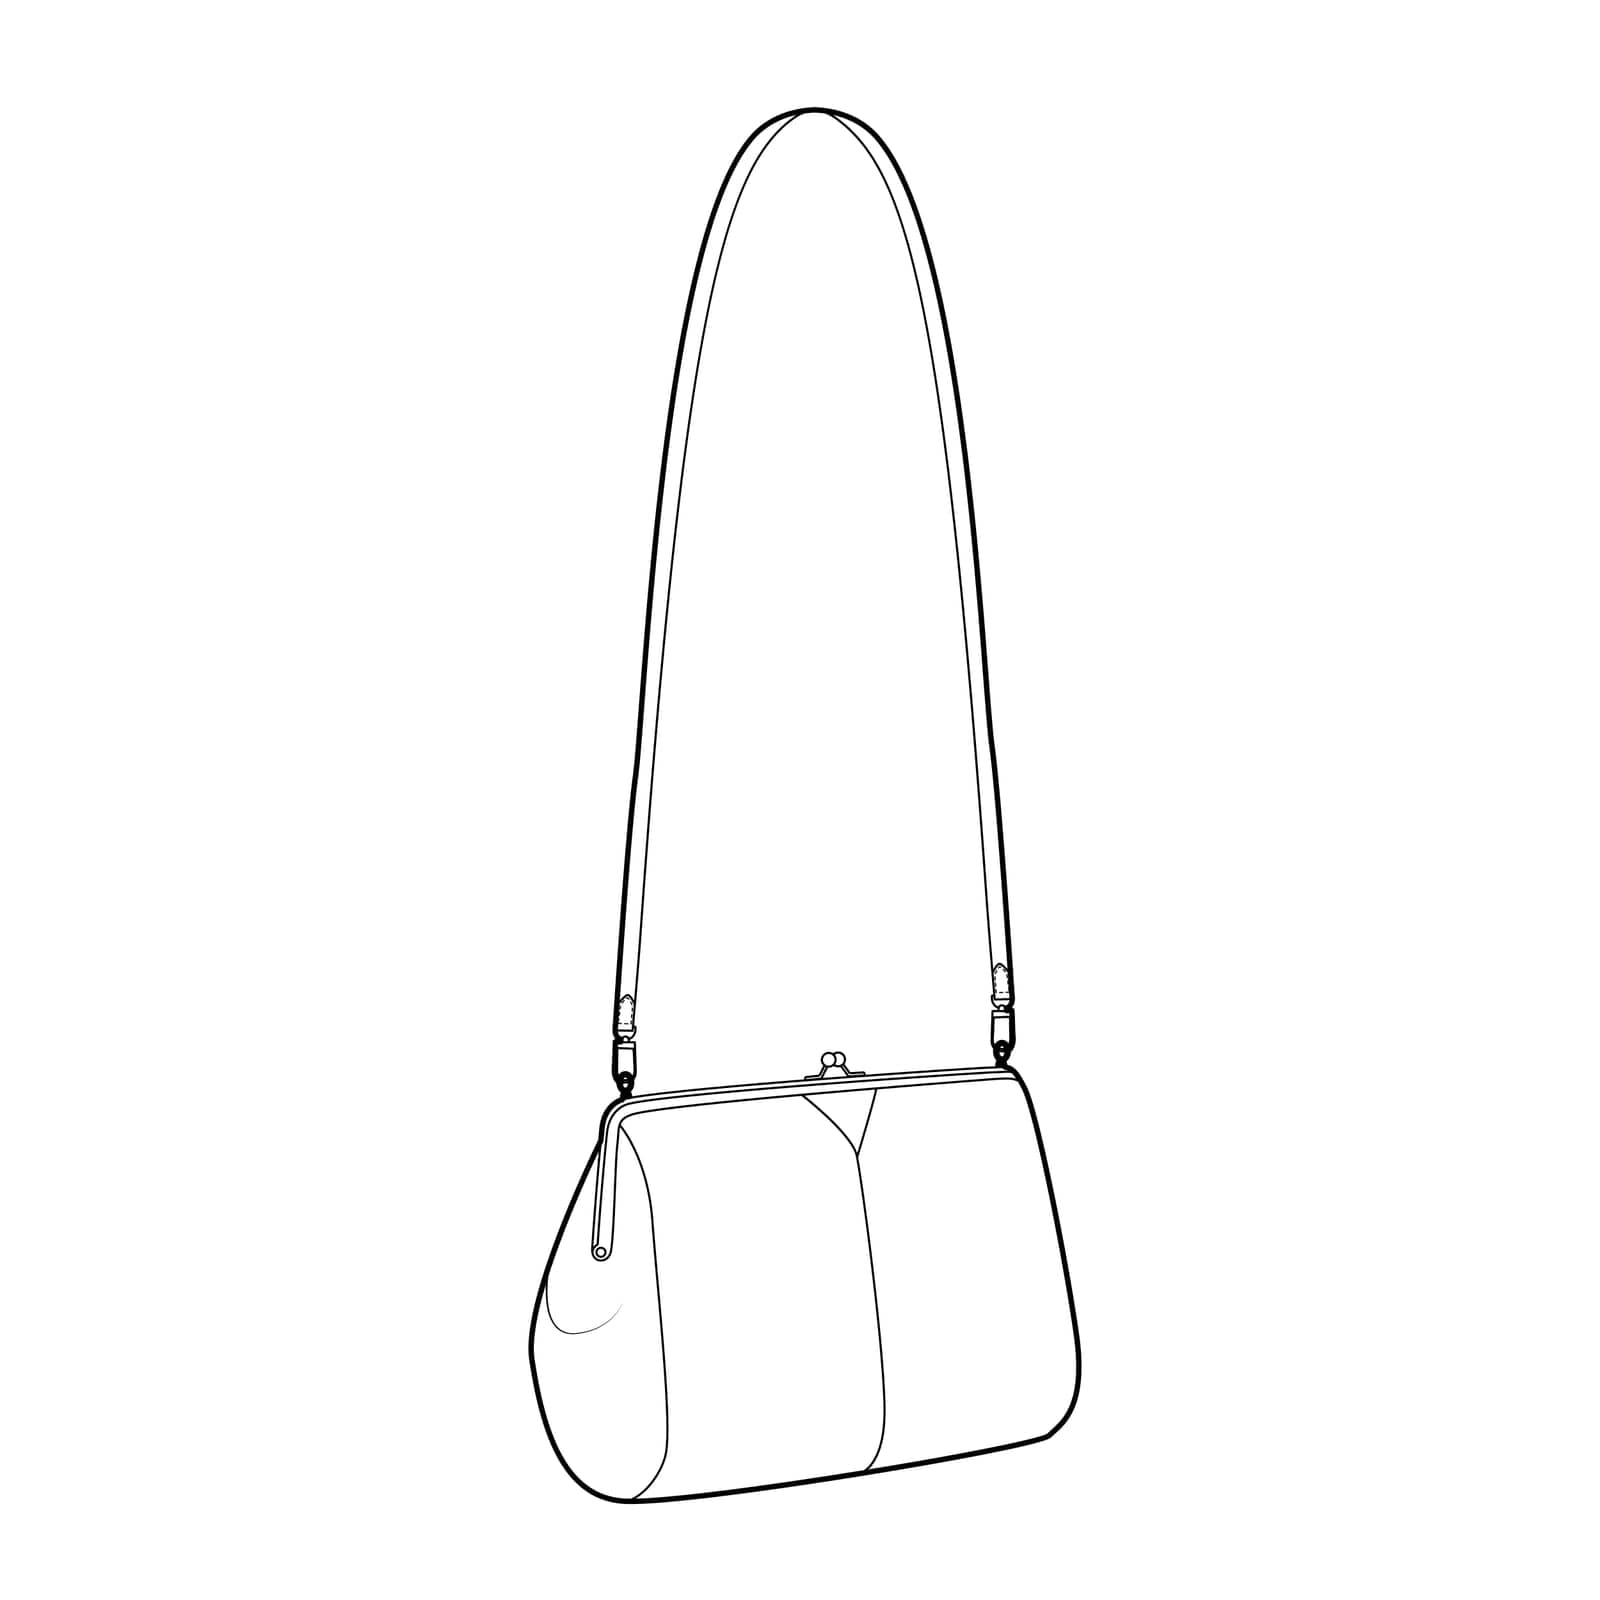 Kiss Lock Cross-Body Bag Handbag with removable strap options. Fashion accessory technical illustration. Vector by Vectoressa